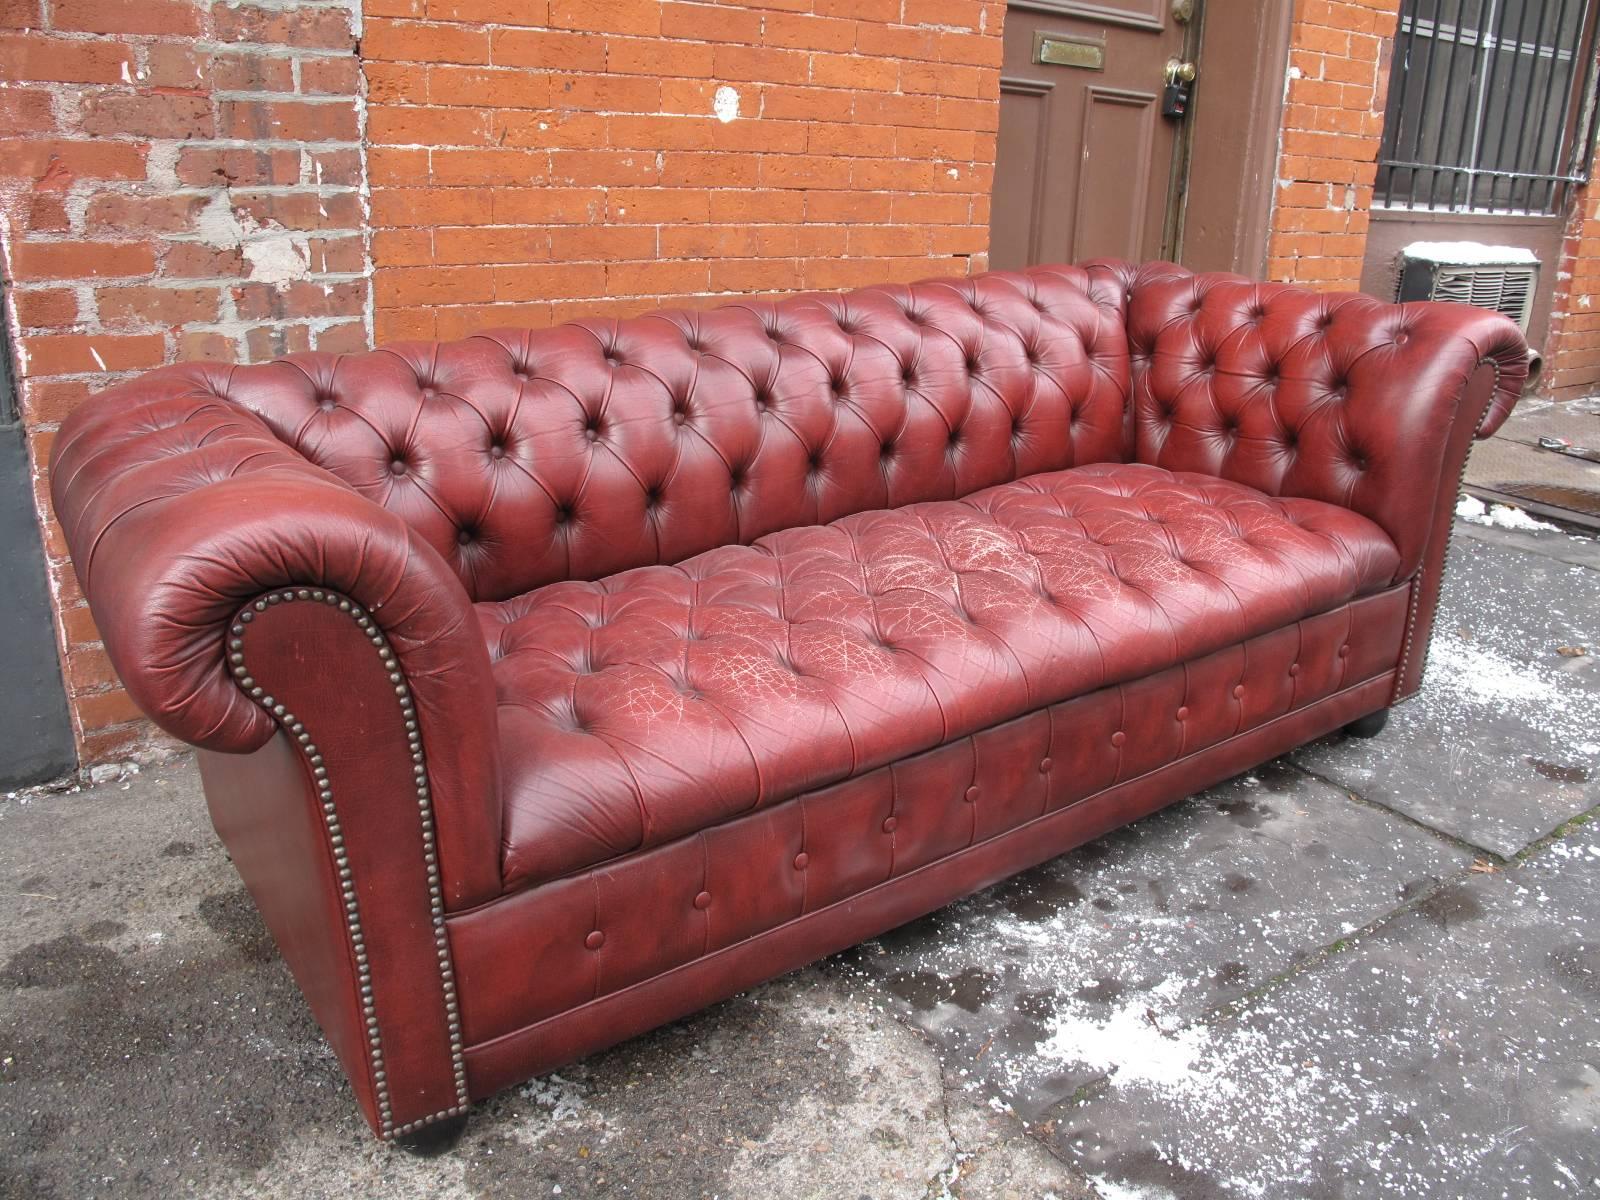 Tufted oxblood leather sofa. Made in England in the mid-later 20th century. Ebonized ball feet.